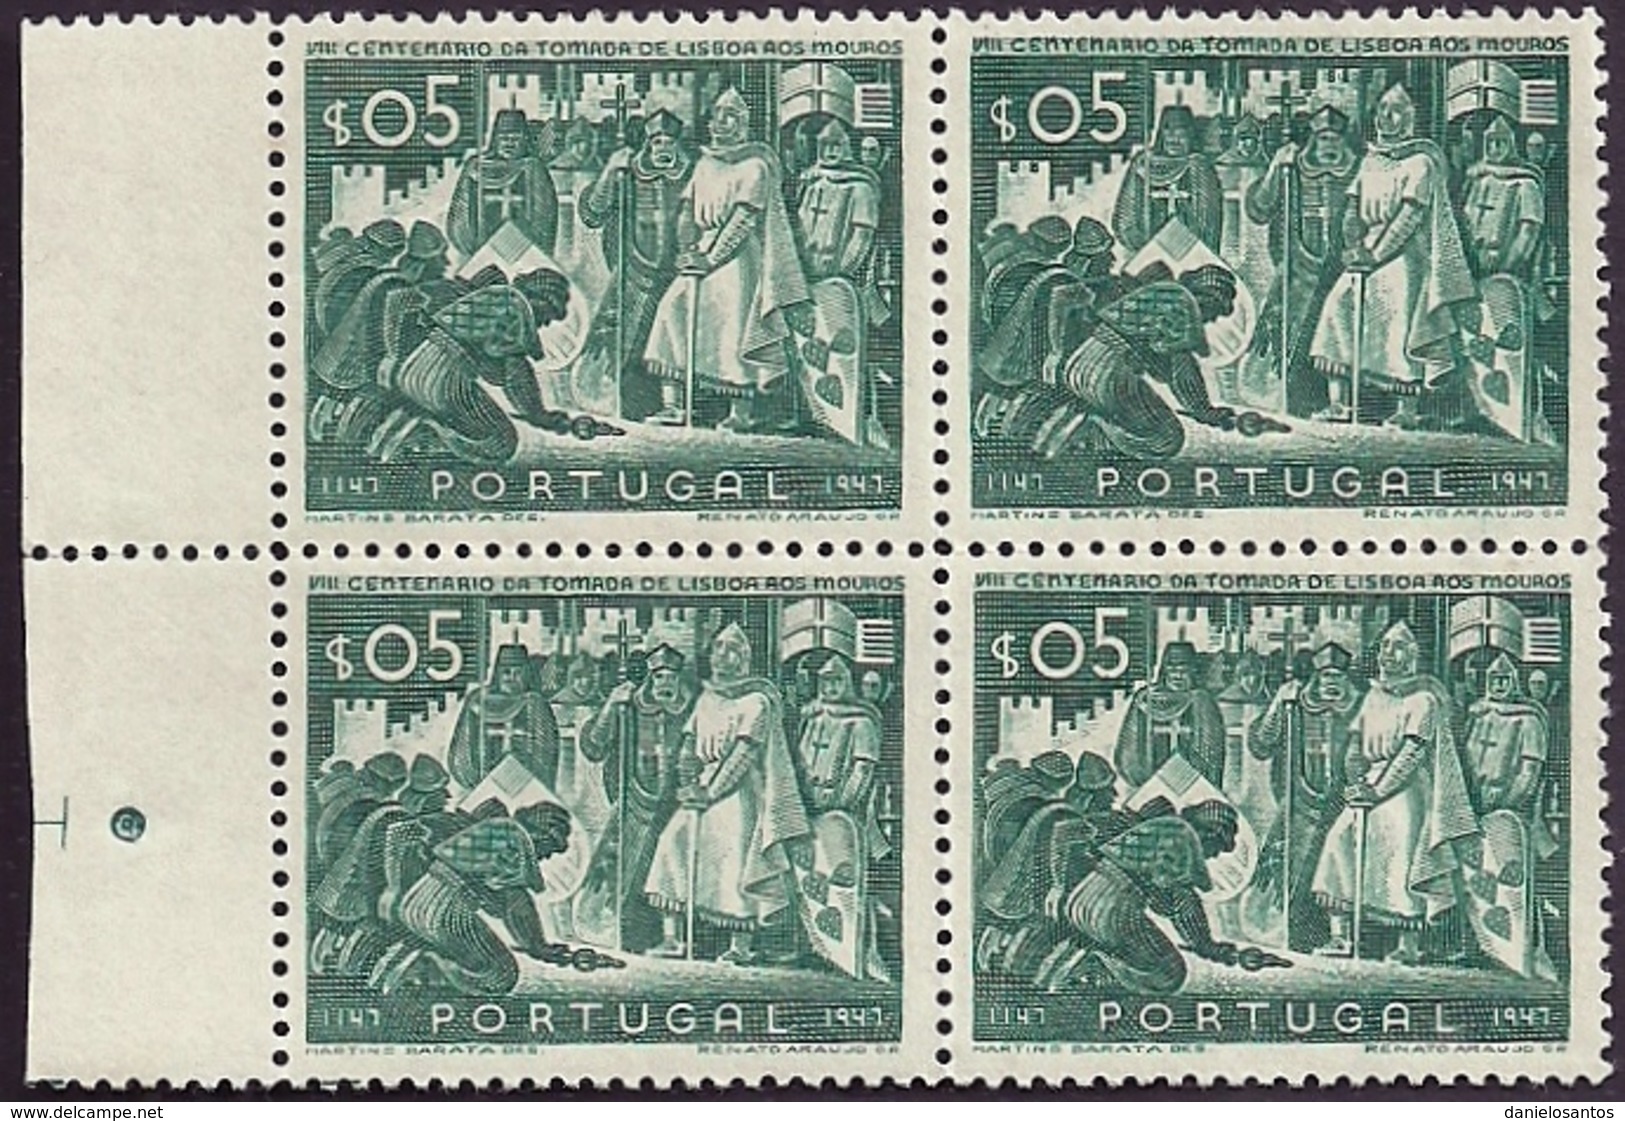 Postugal 1947 80th Anniv Conquest Of Lisbon From Moors - 8º Cent Tomada Lisboa Aos Mouros Block Of 4 MNH - Militaria